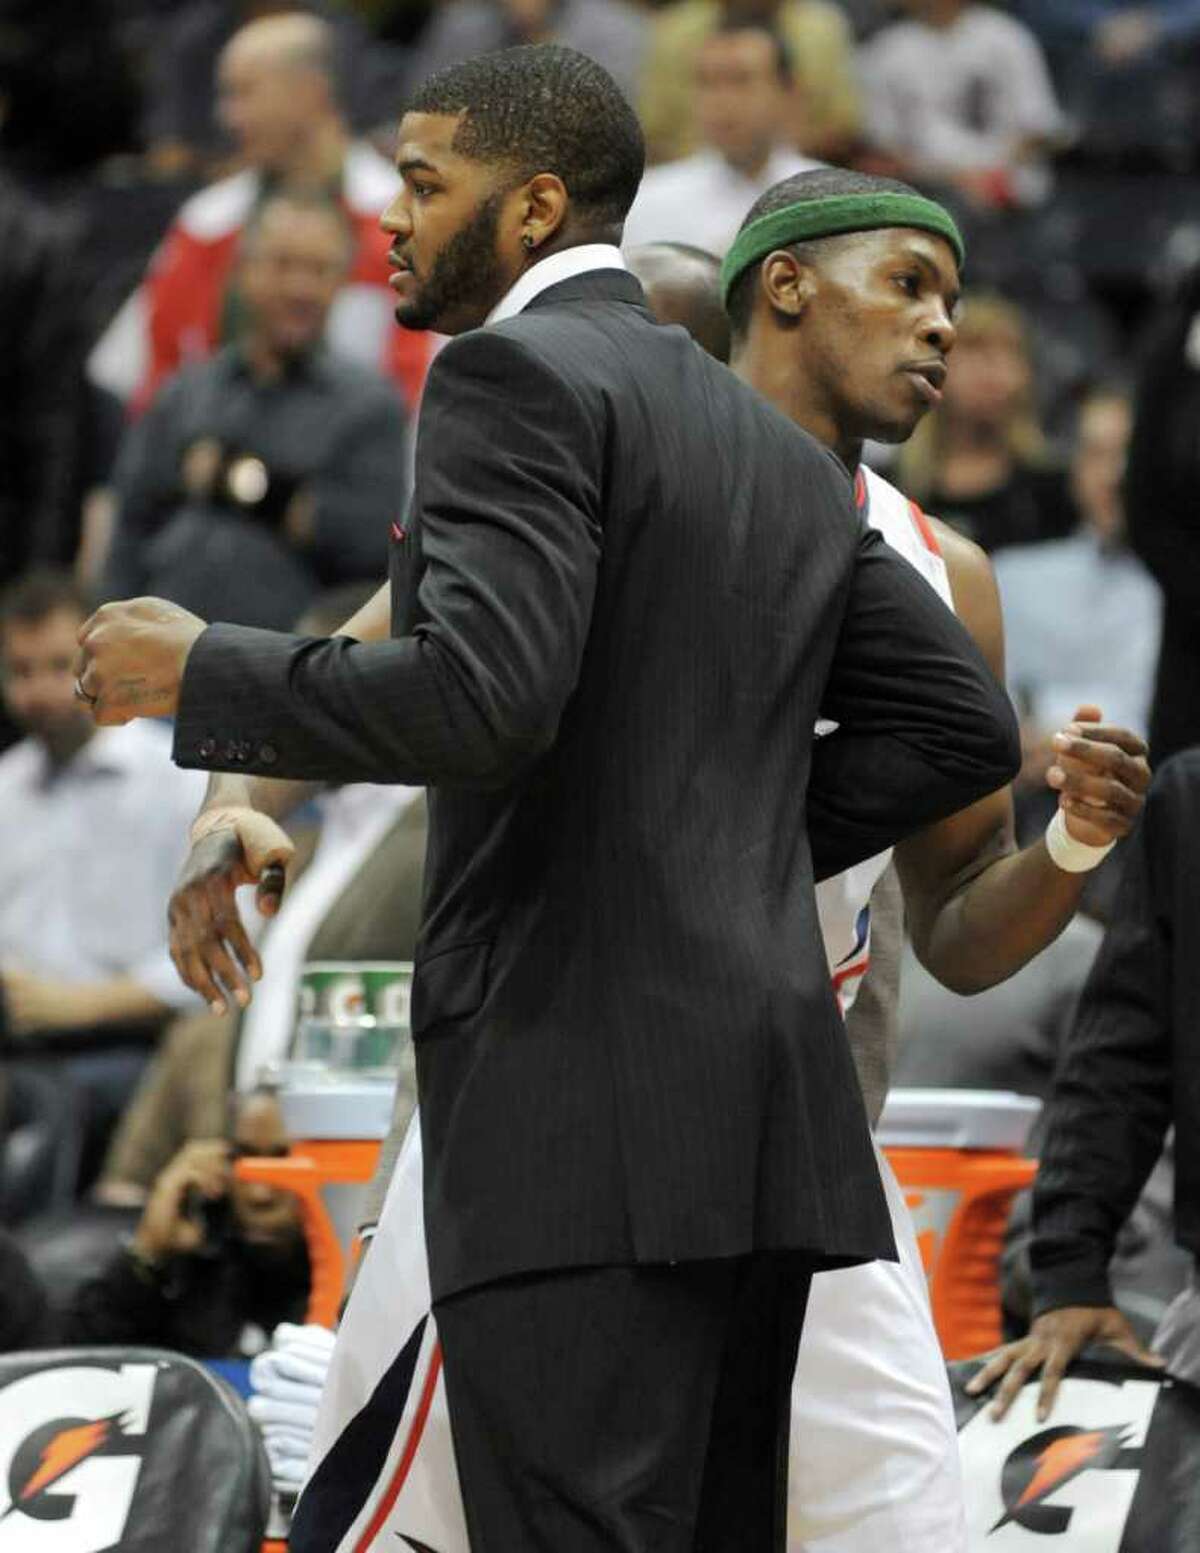 Atlanta Hawks forward Josh Smith, left, greets teammate Joe Johnson before the Hawks hosted the San Antonio Spurs in an NBA basketball game Tuesday, April 5, 2011, at in Atlanta. Smith has sweliing in his right knee and was unable to play.